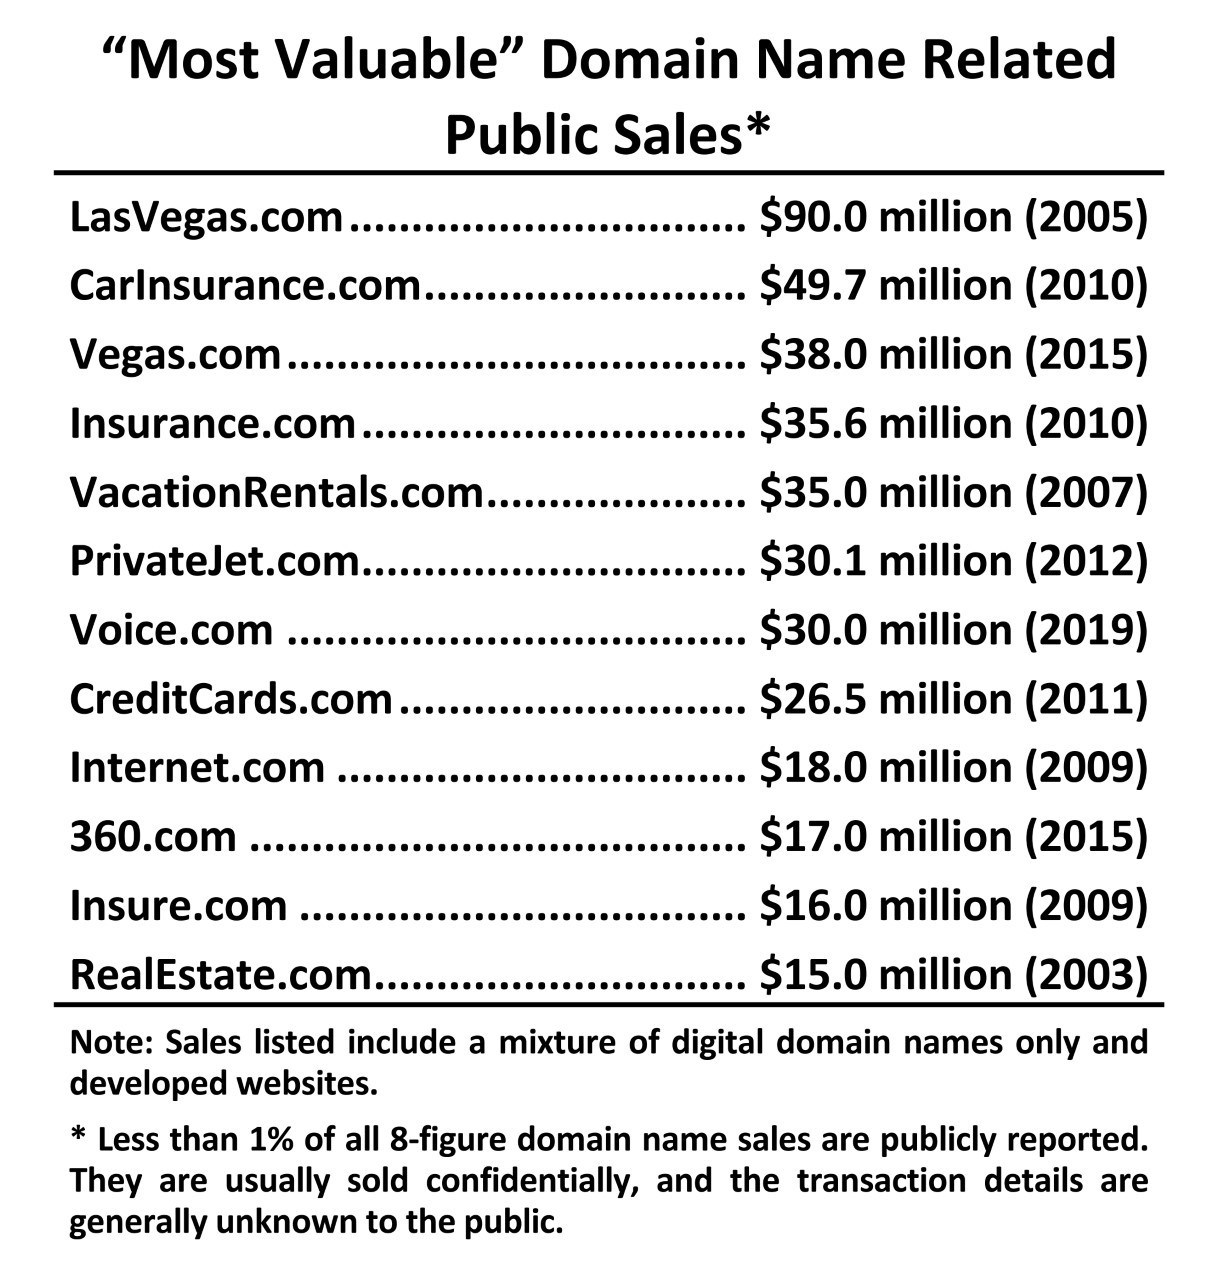 Most Valuable Domain Name Sales